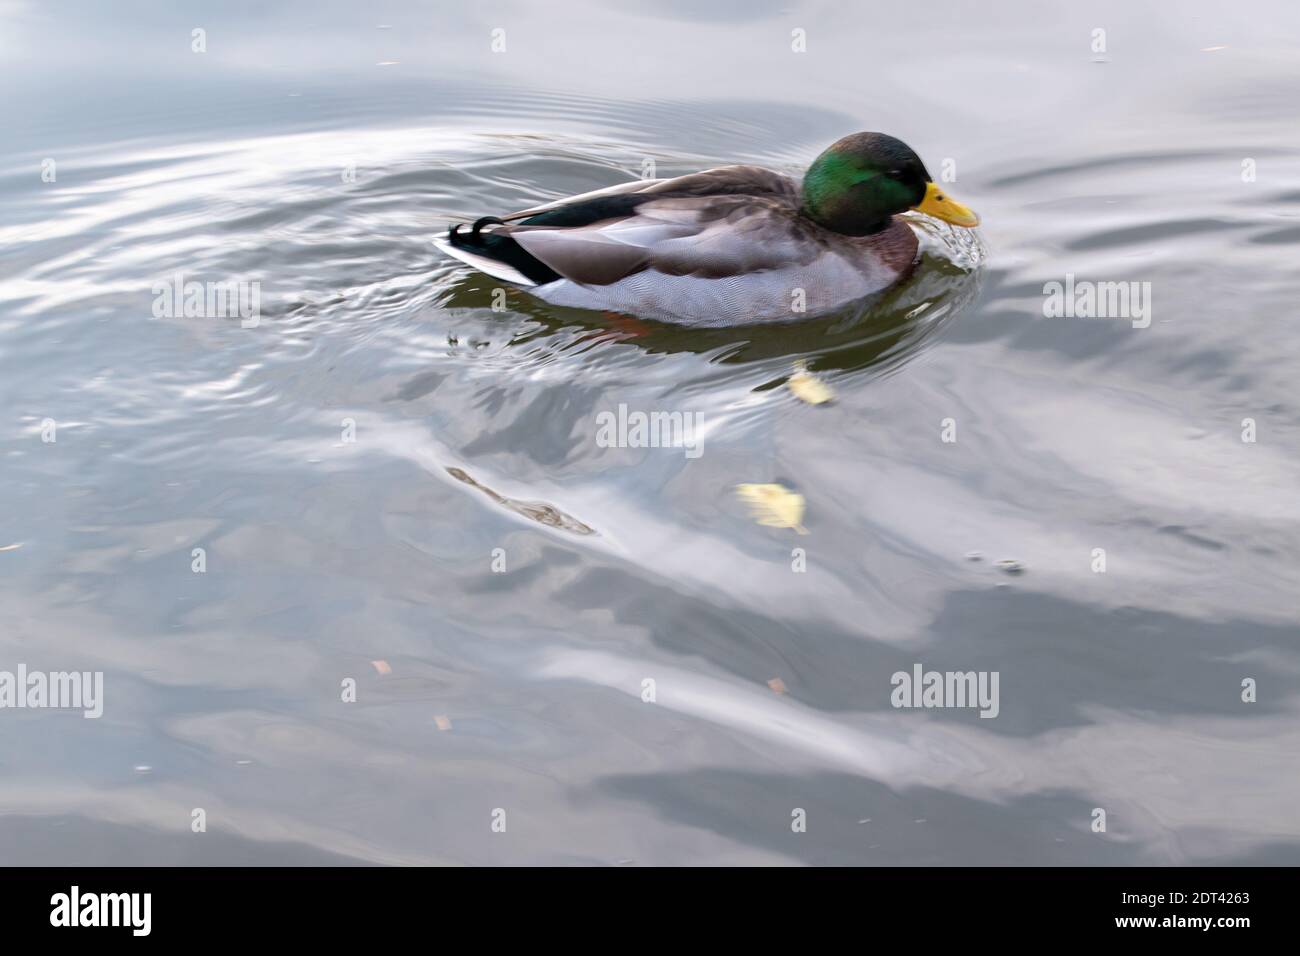 Ducks in autumn on a pond in a park. Stock Photo